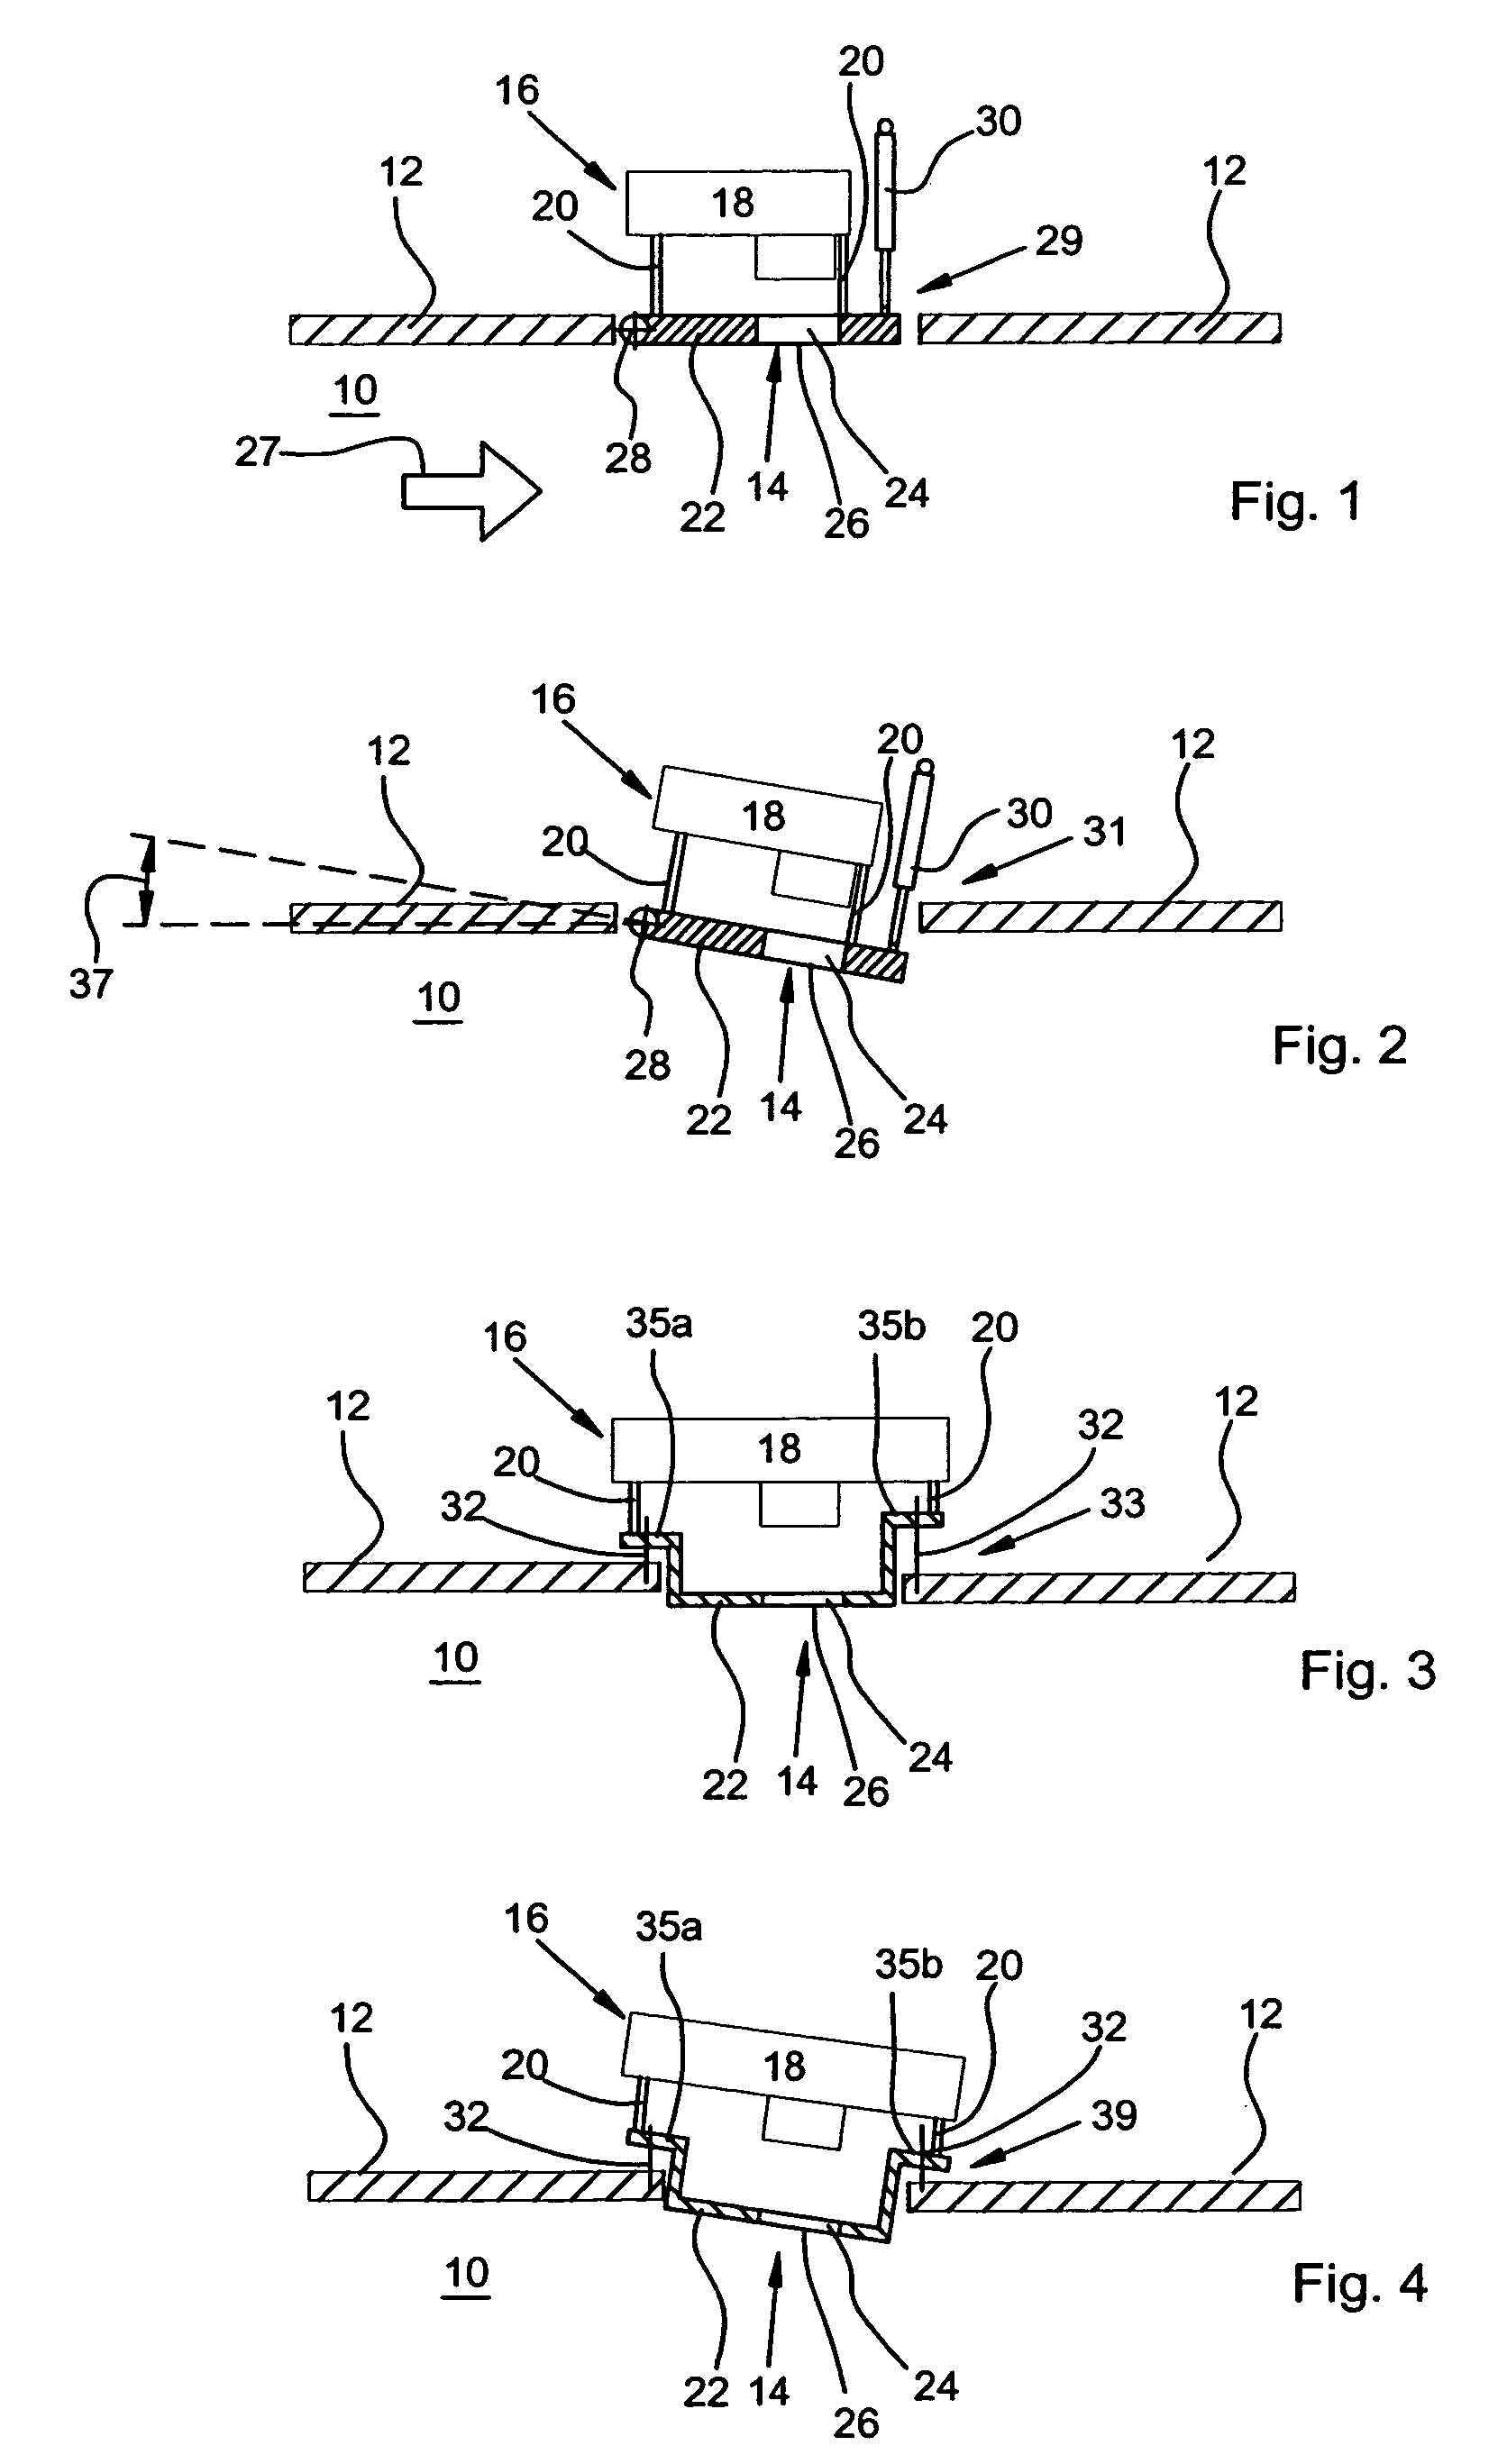 Agricultural measurement device with movable detector head